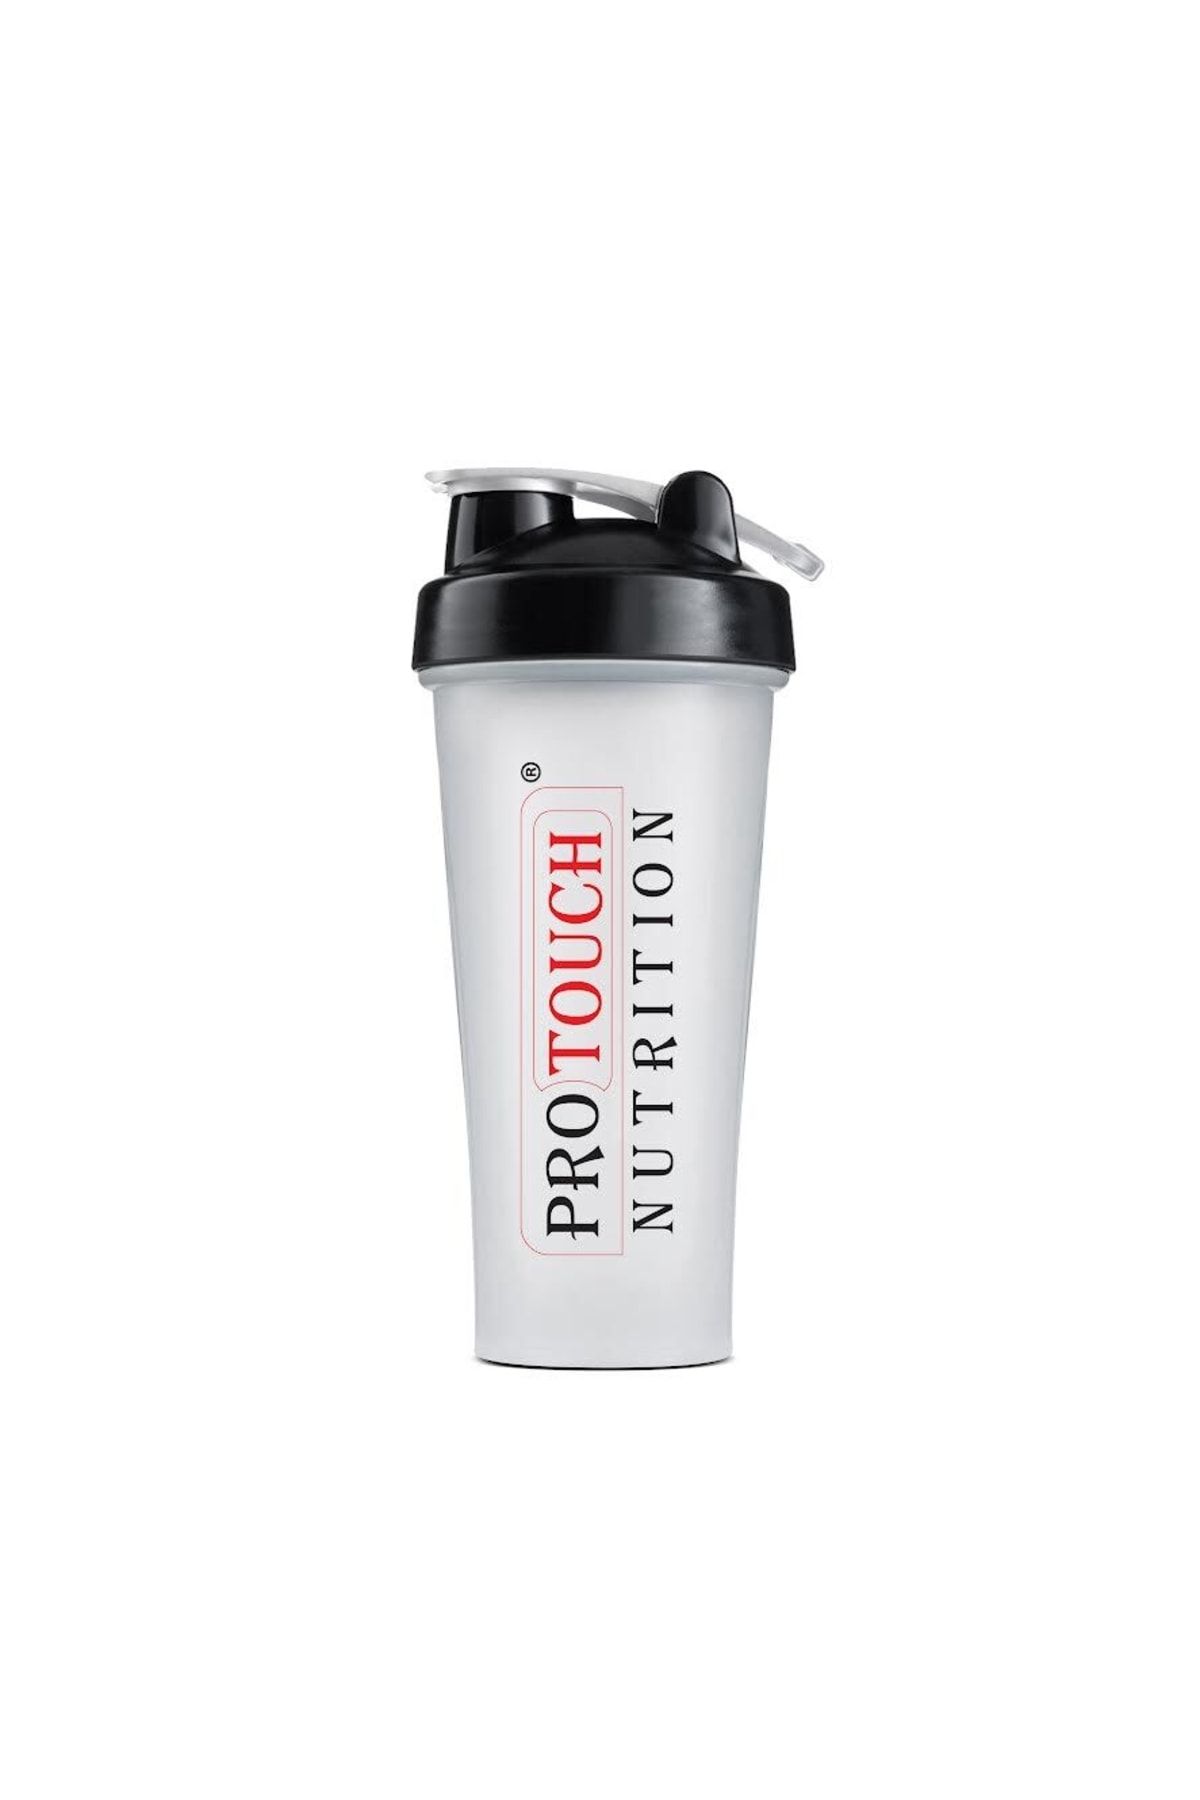 Protouch Nutrition Shaker